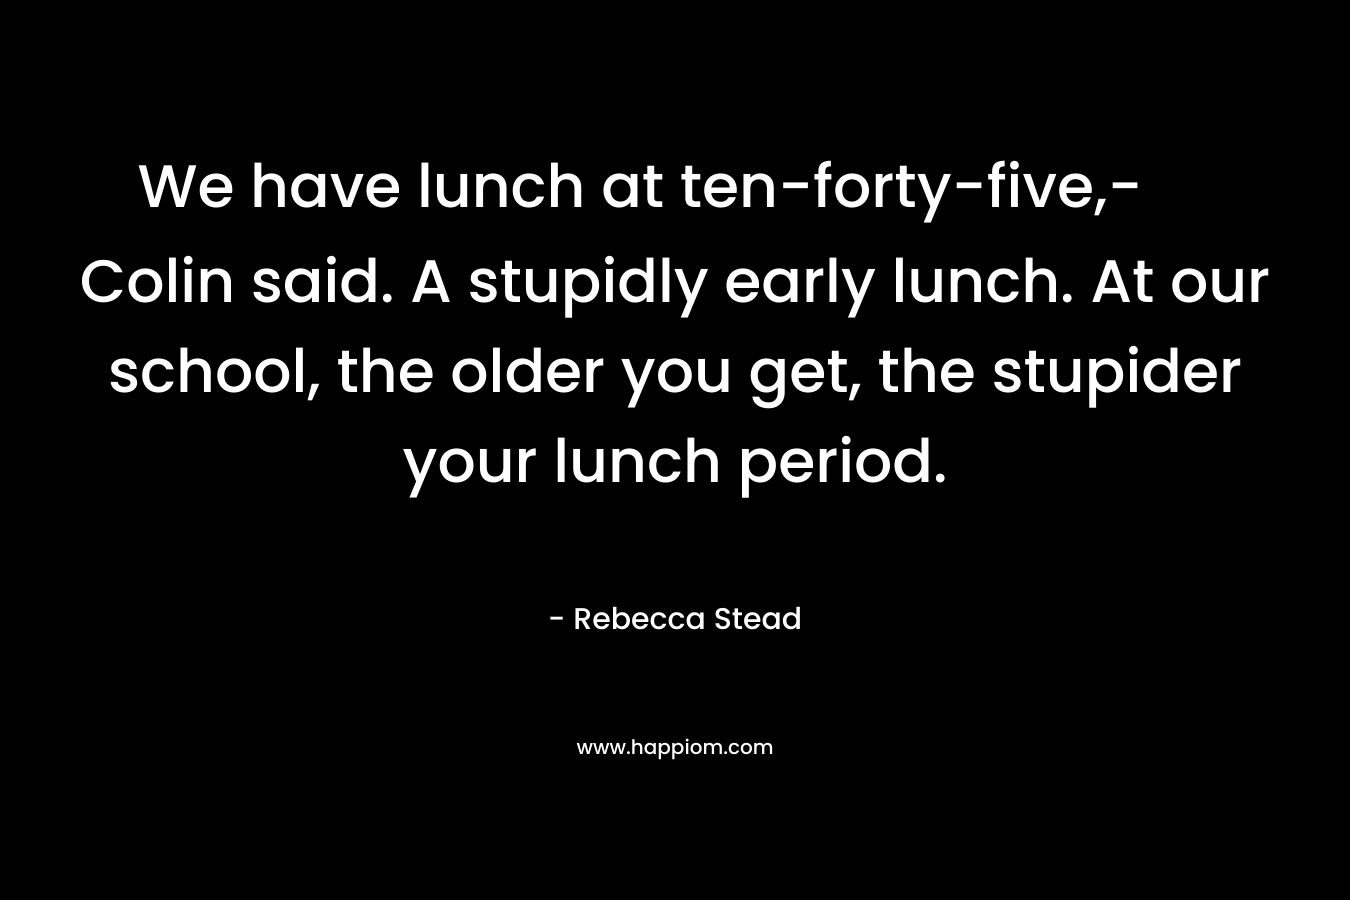 We have lunch at ten-forty-five,- Colin said. A stupidly early lunch. At our school, the older you get, the stupider your lunch period. – Rebecca Stead